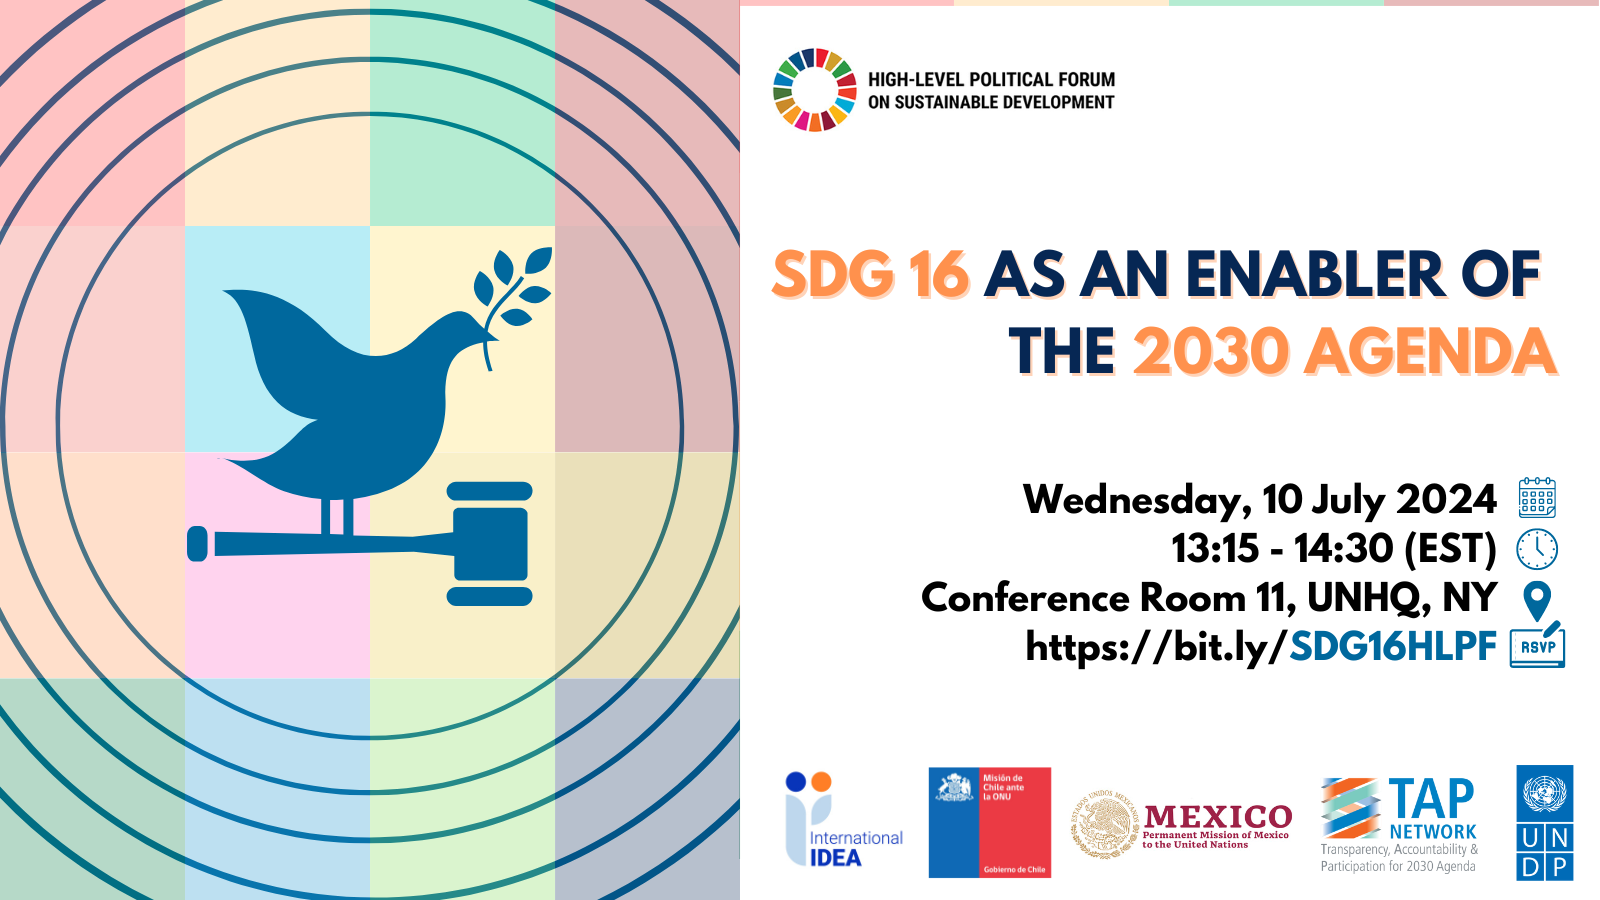 Flyer of the event "SDG 16 as an Enabler of the 2030 Agenda"